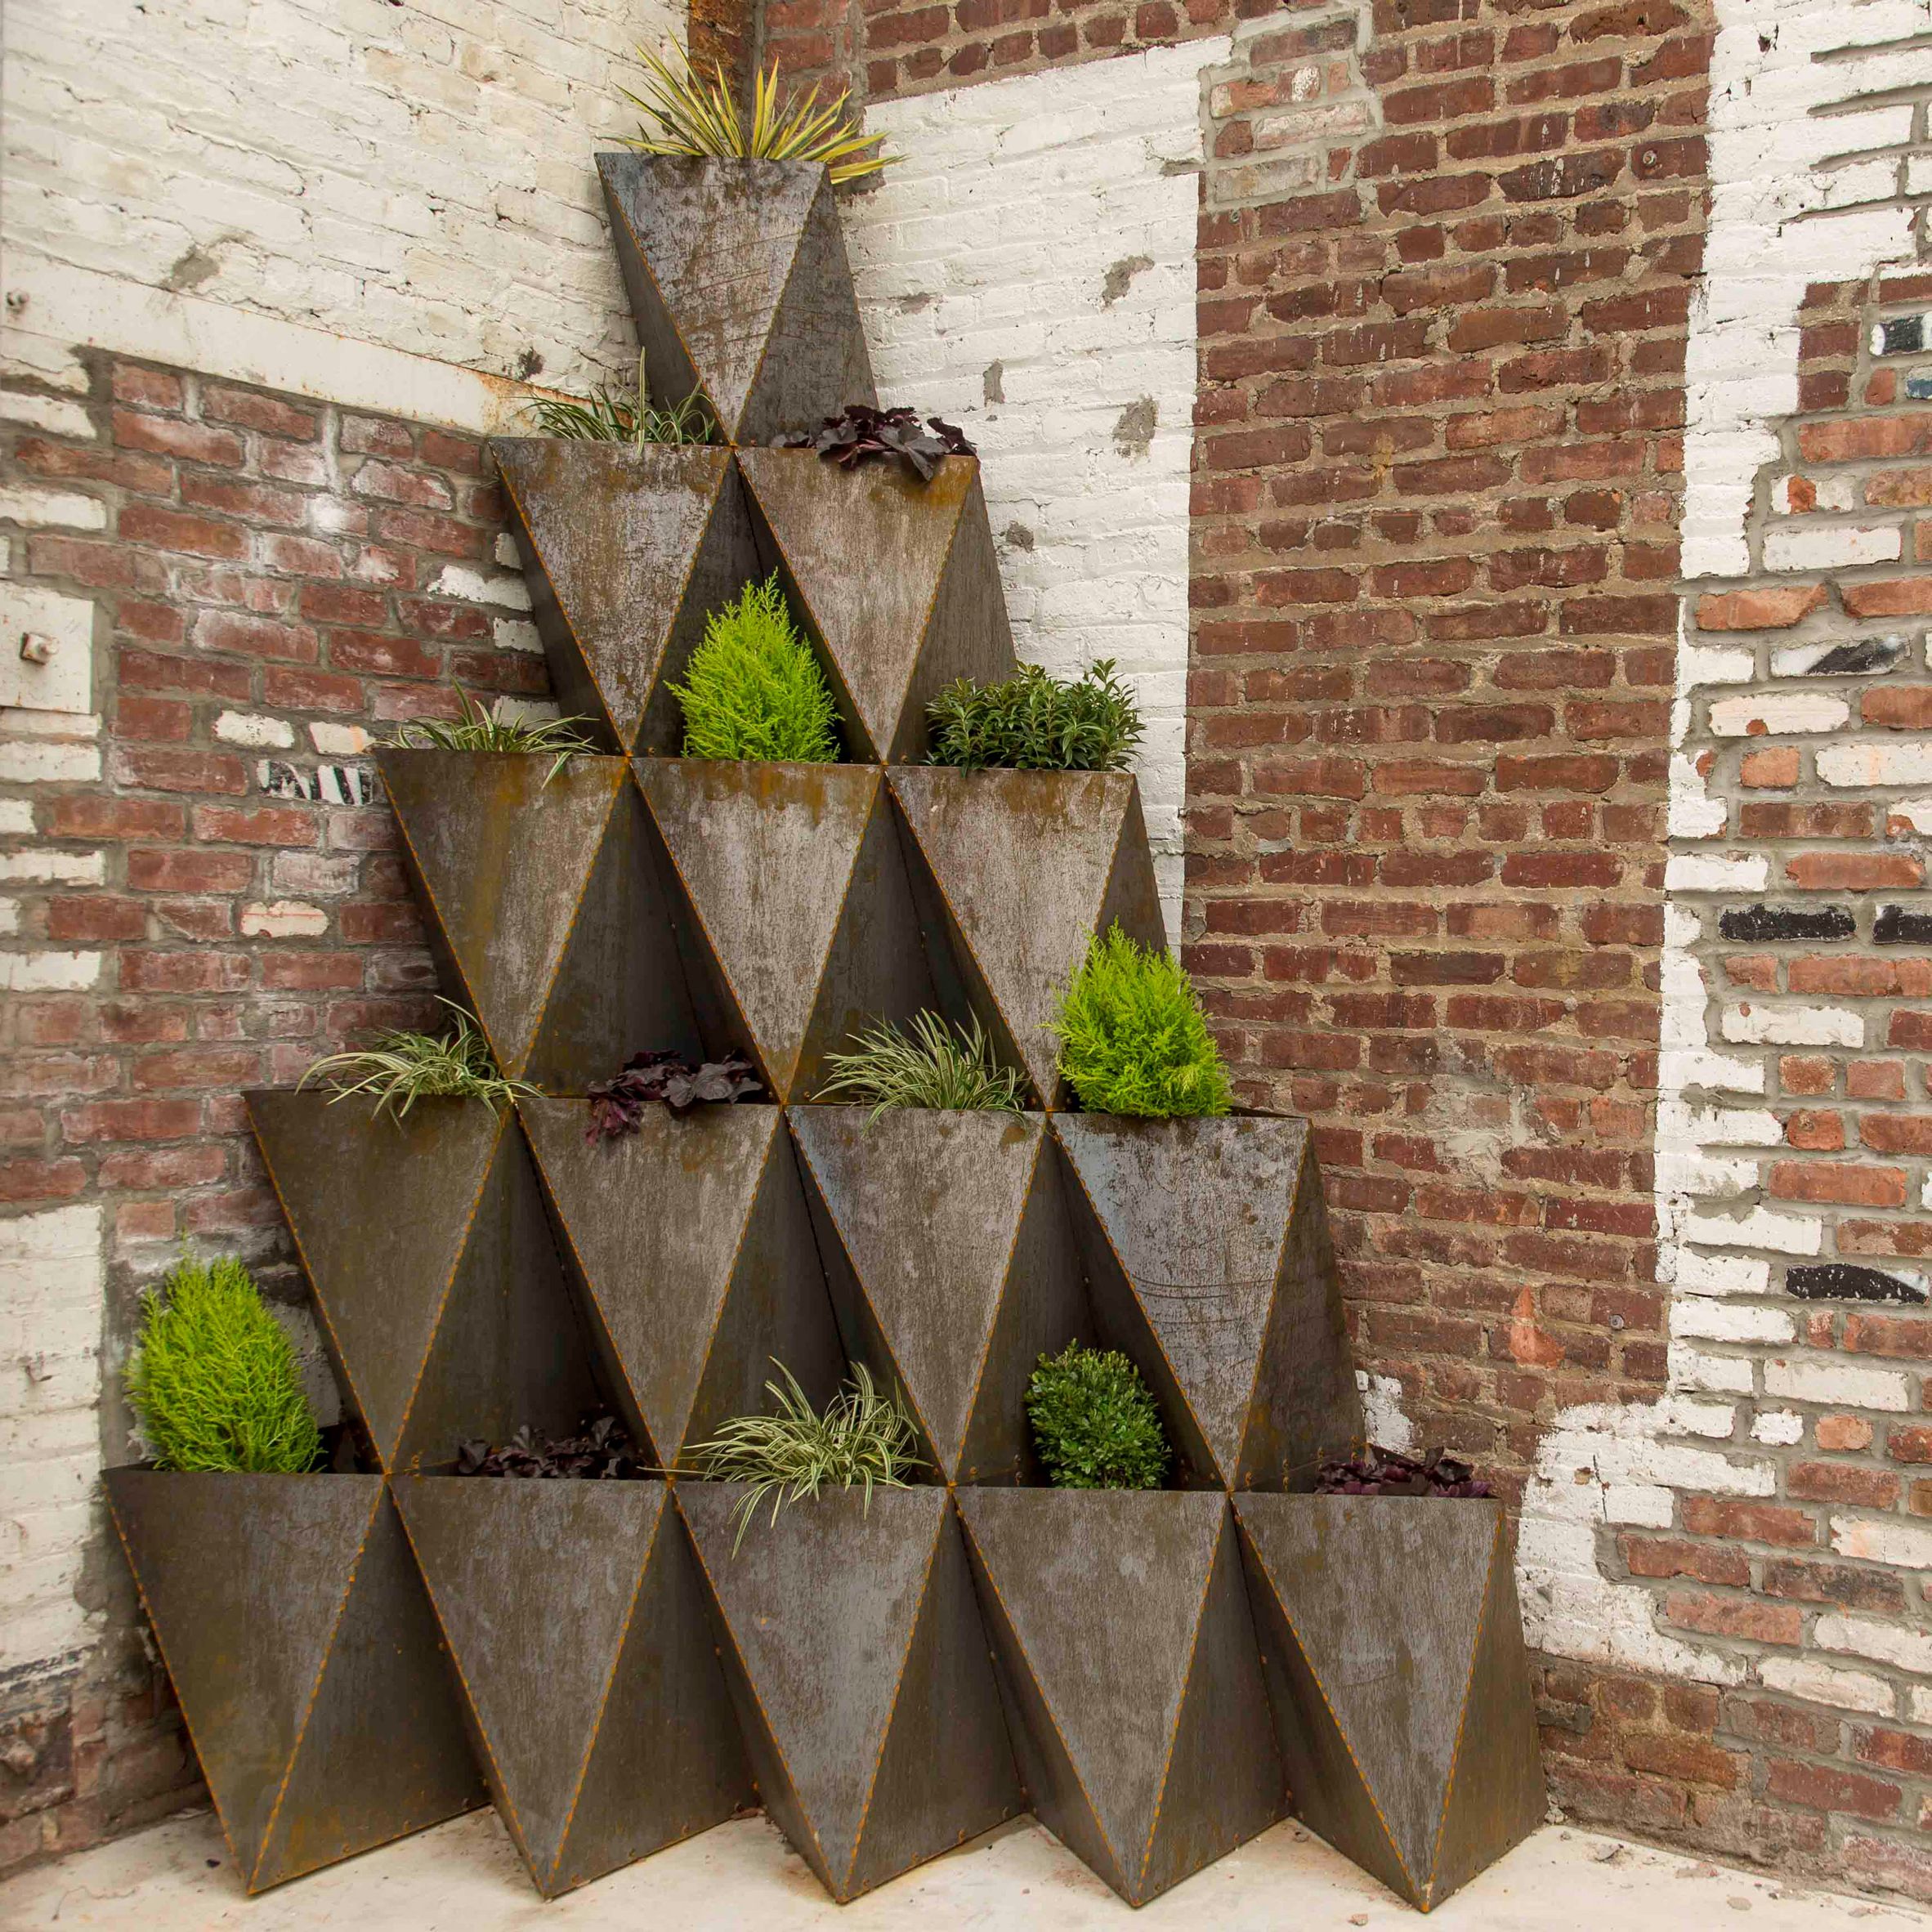 Prism Plant Stands In Preferred Prism Plantersthe Principals Stack Up Into Arches And Pyramids (View 7 of 10)